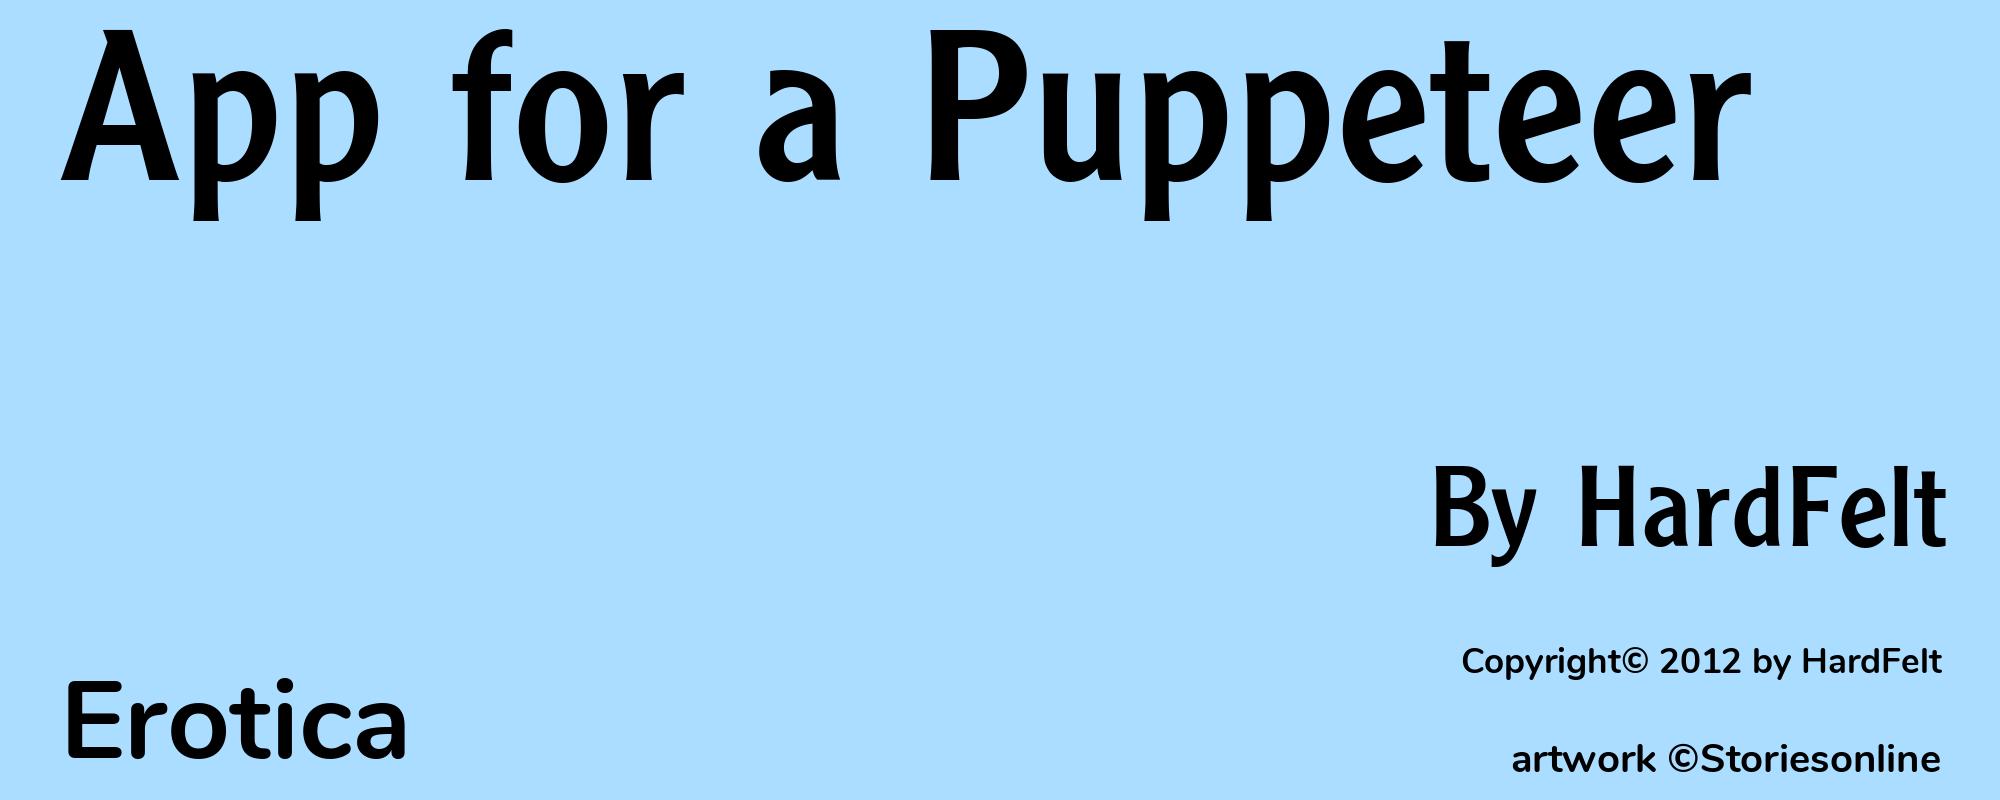 App for a Puppeteer - Cover